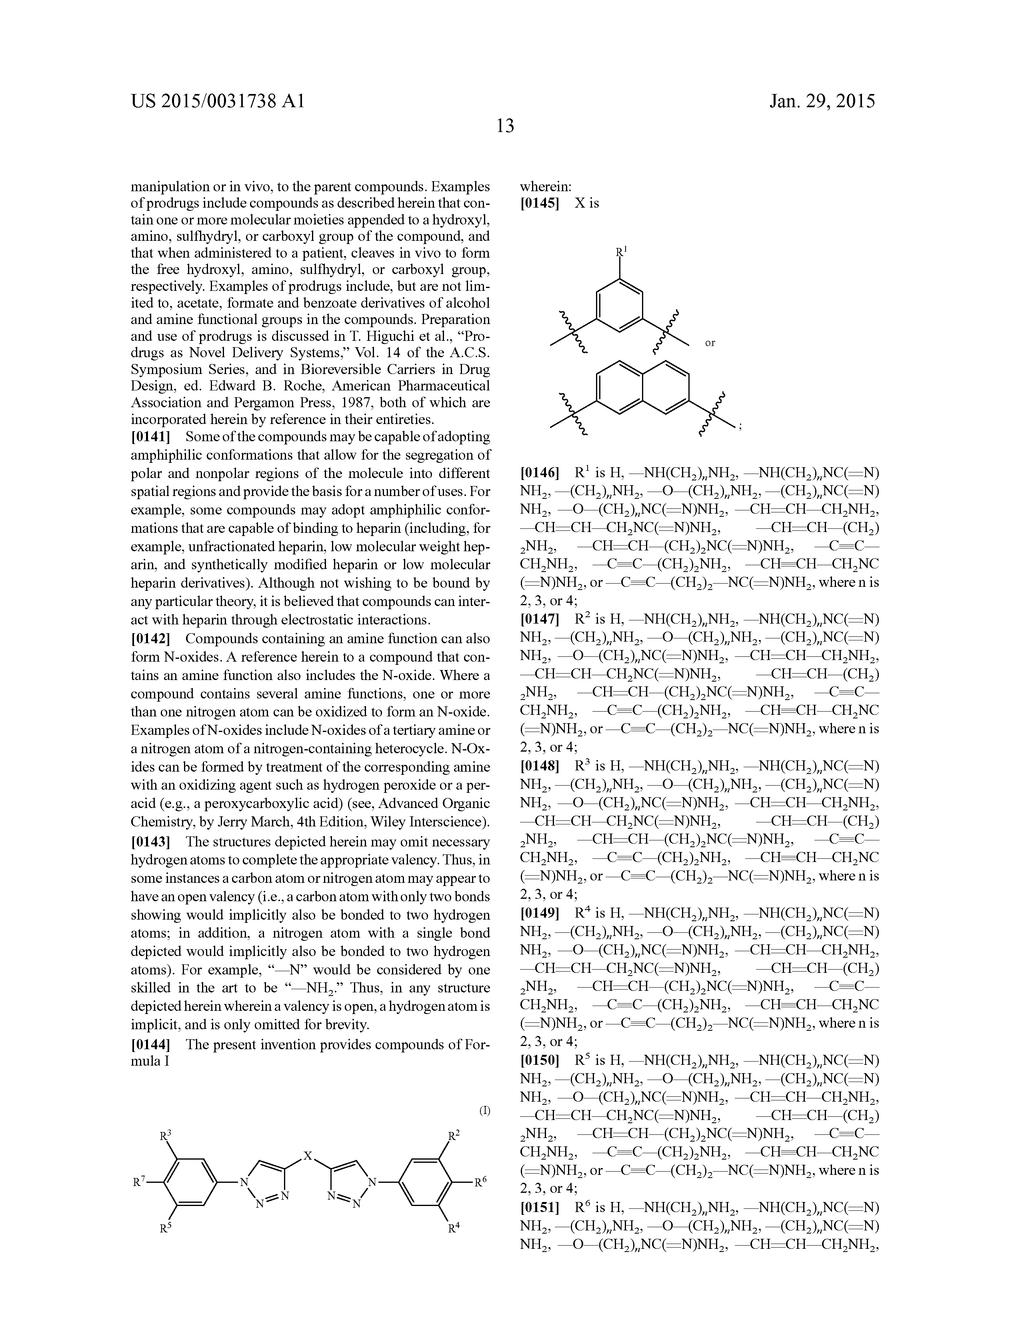 CYCLIC COMPOUNDS AND METHODS OF MAKING AND USING THE SAME - diagram, schematic, and image 16